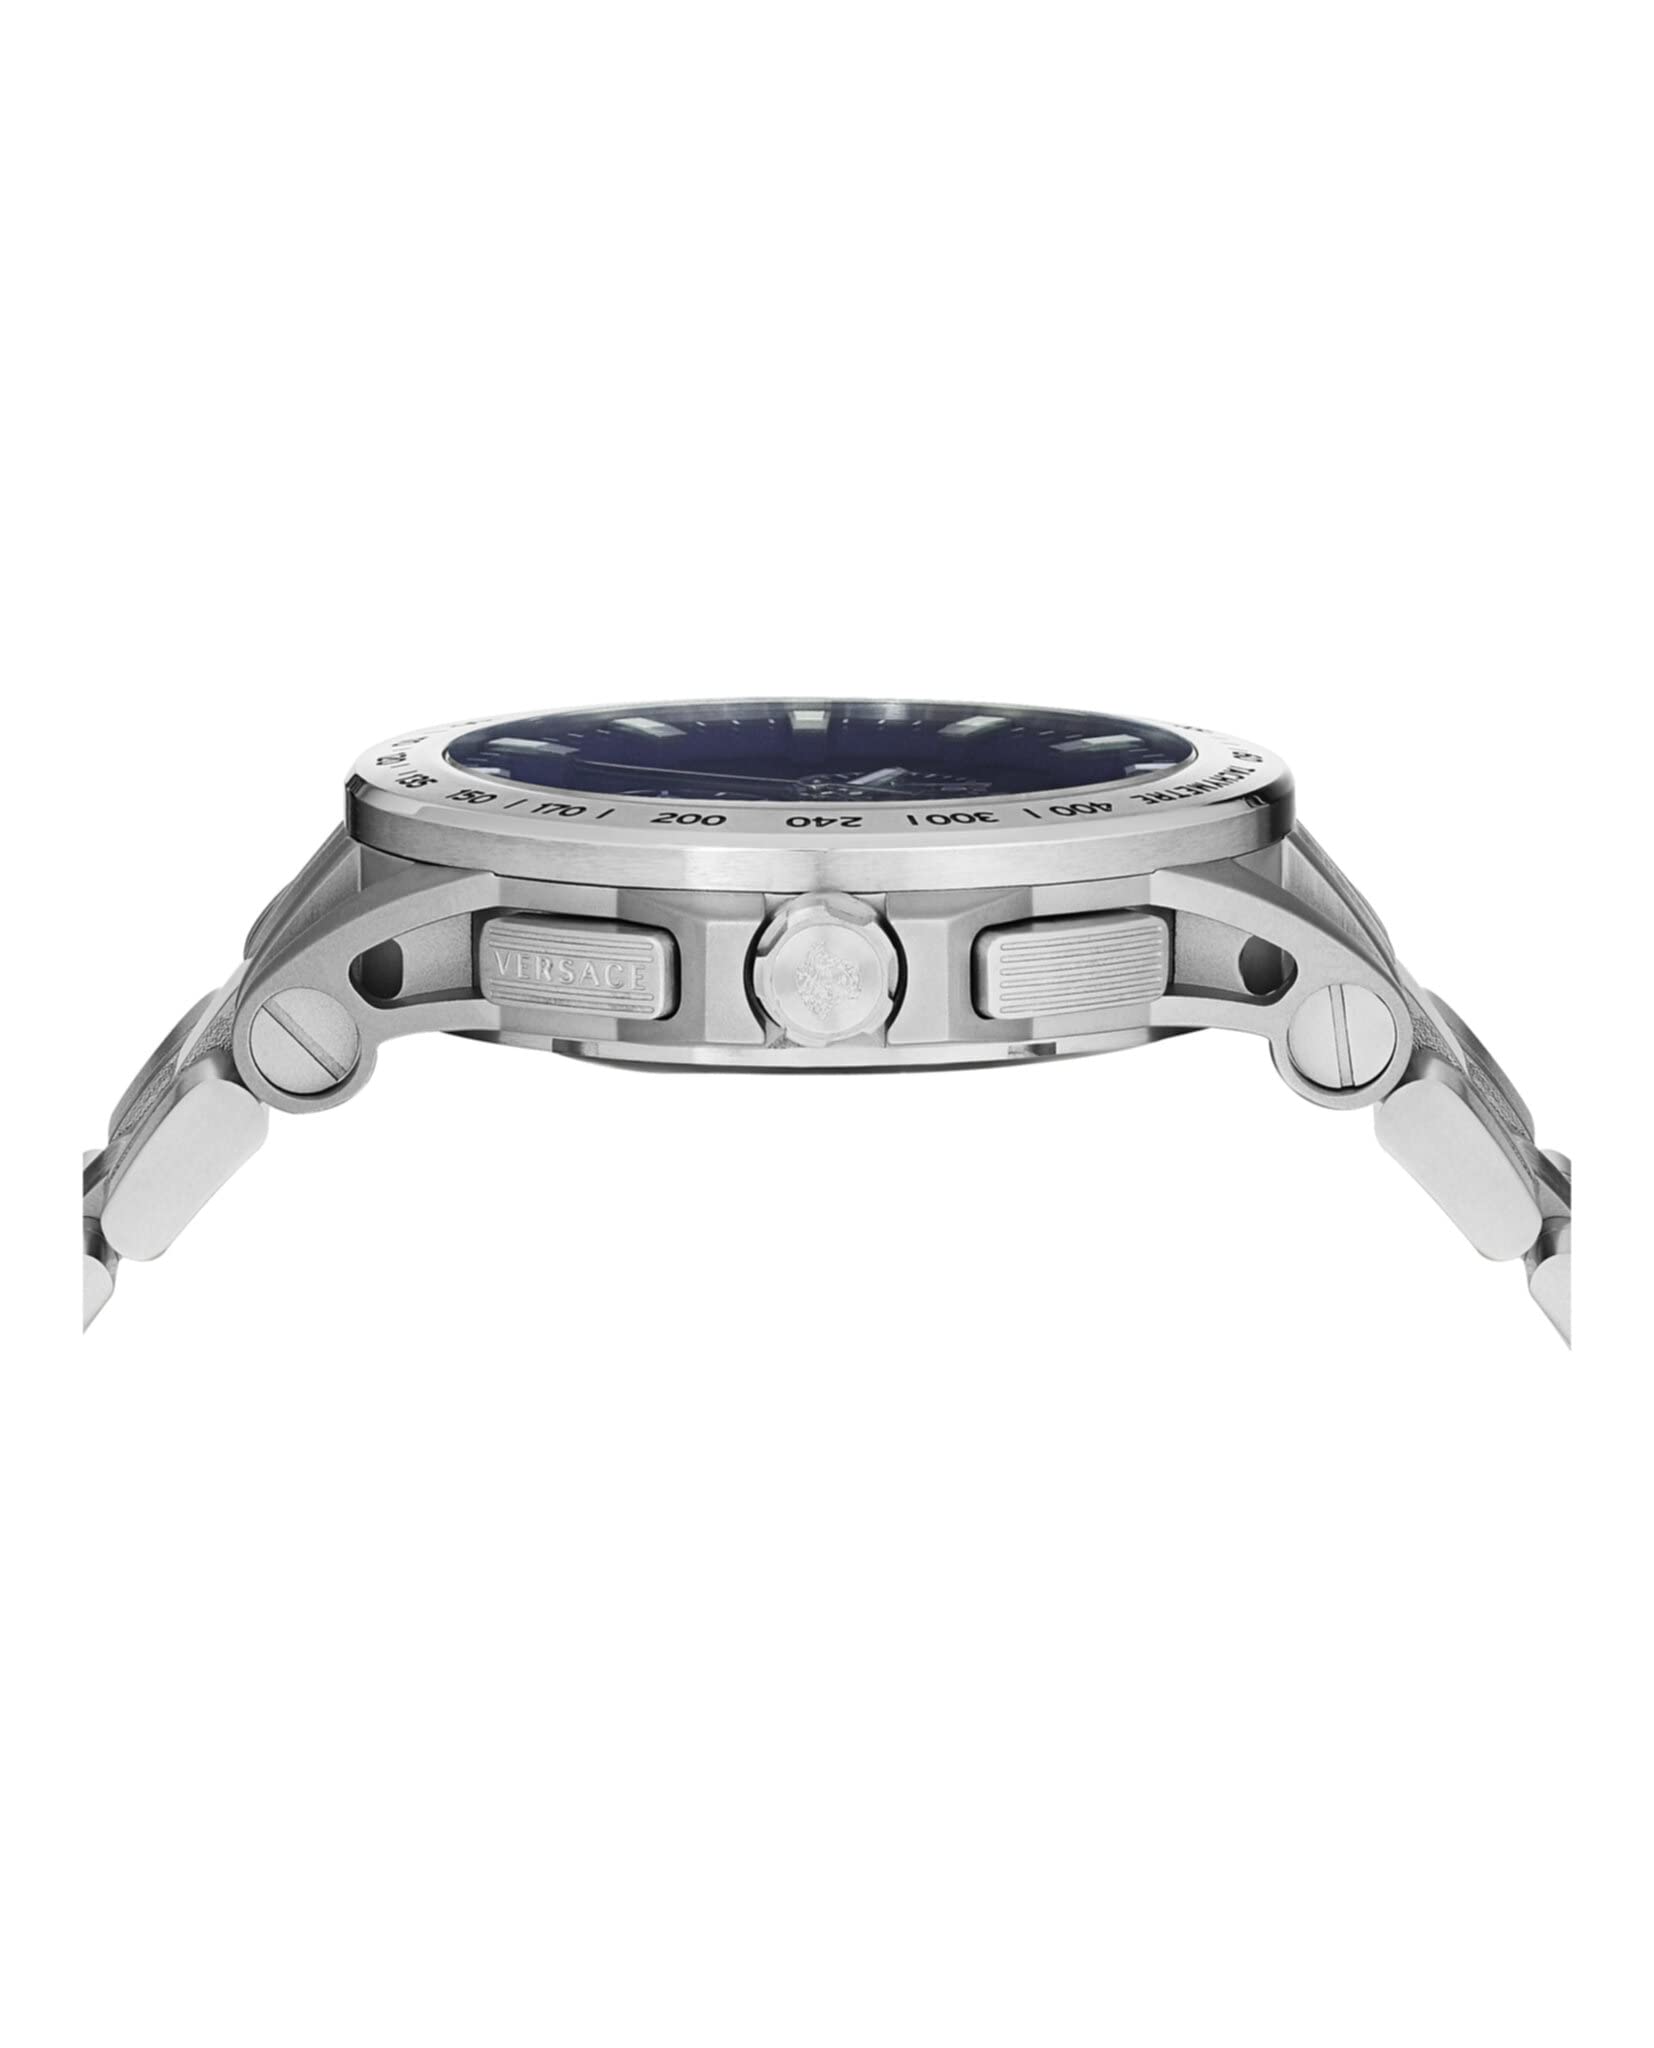 Versace Sport Tech Collection Luxury Mens Watch Timepiece with a Silver Bracelet Featuring a Stainless Steel Case and Blue Dial